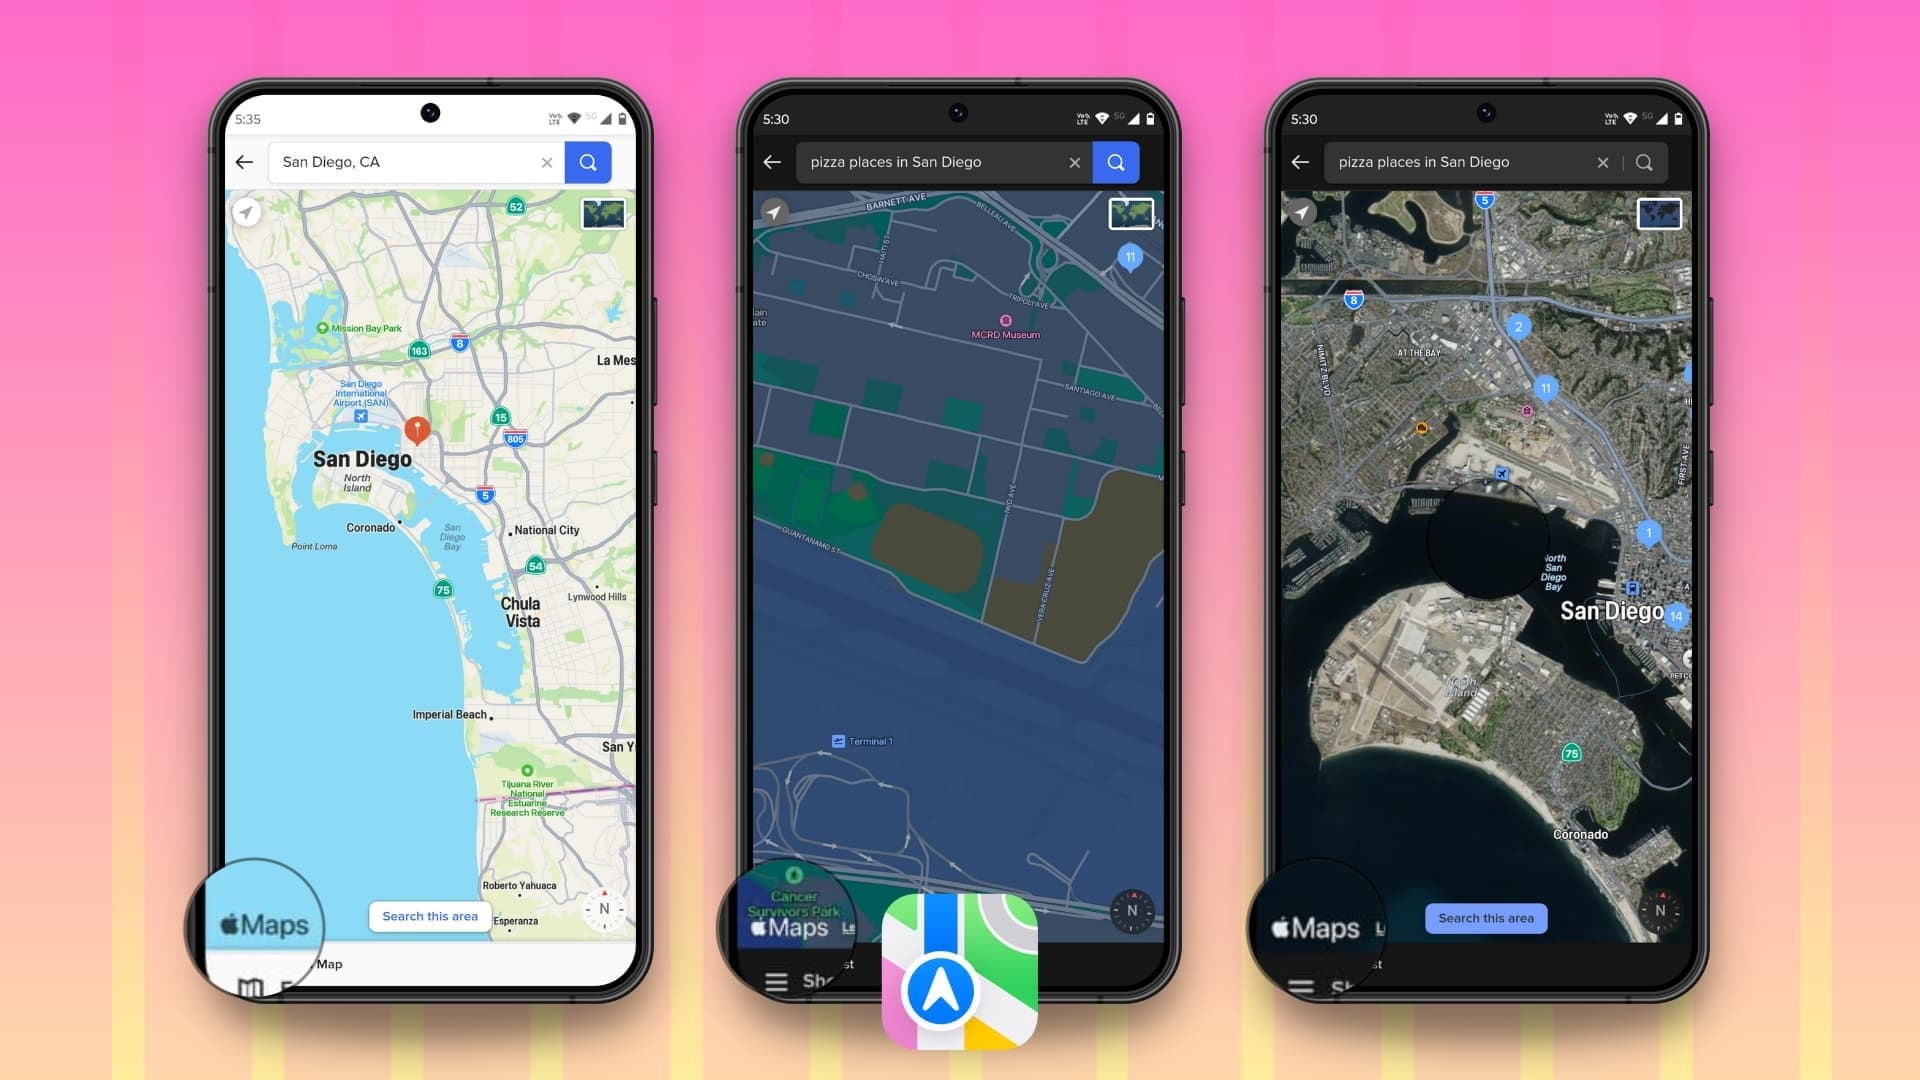 Three Android phone mockups showing Apple Maps